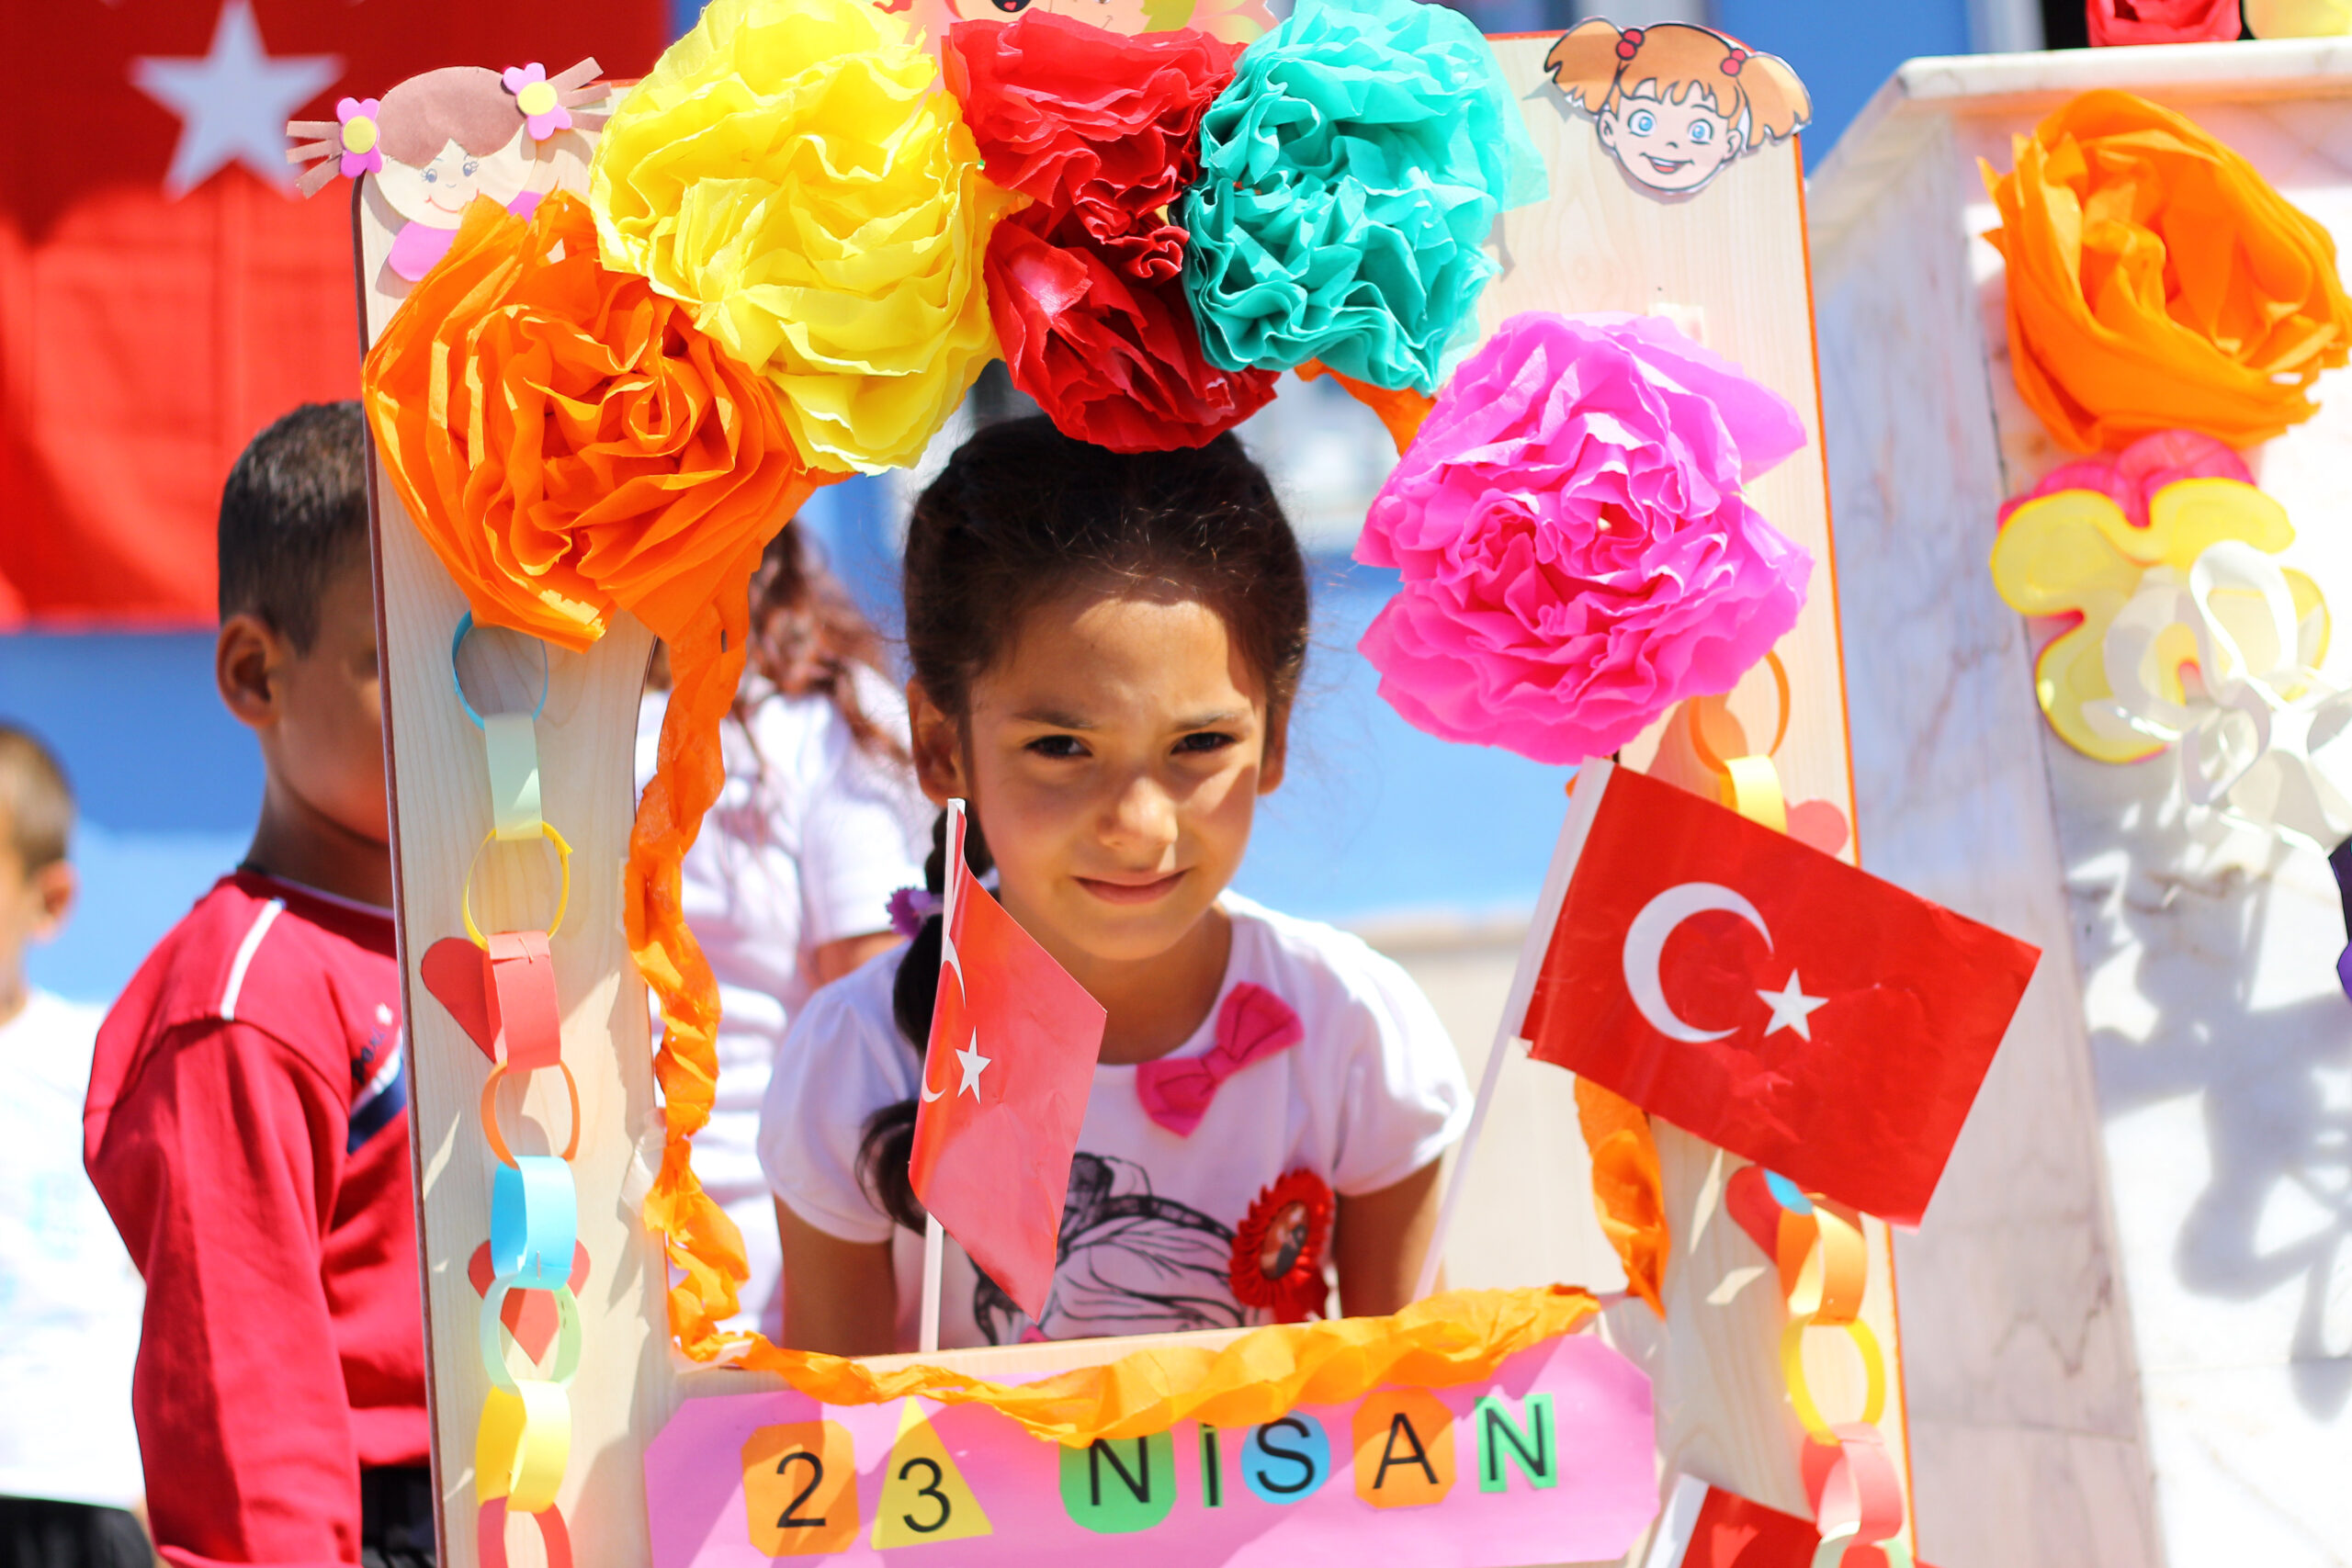 On Children’s Day in Turkey, adults set bad example